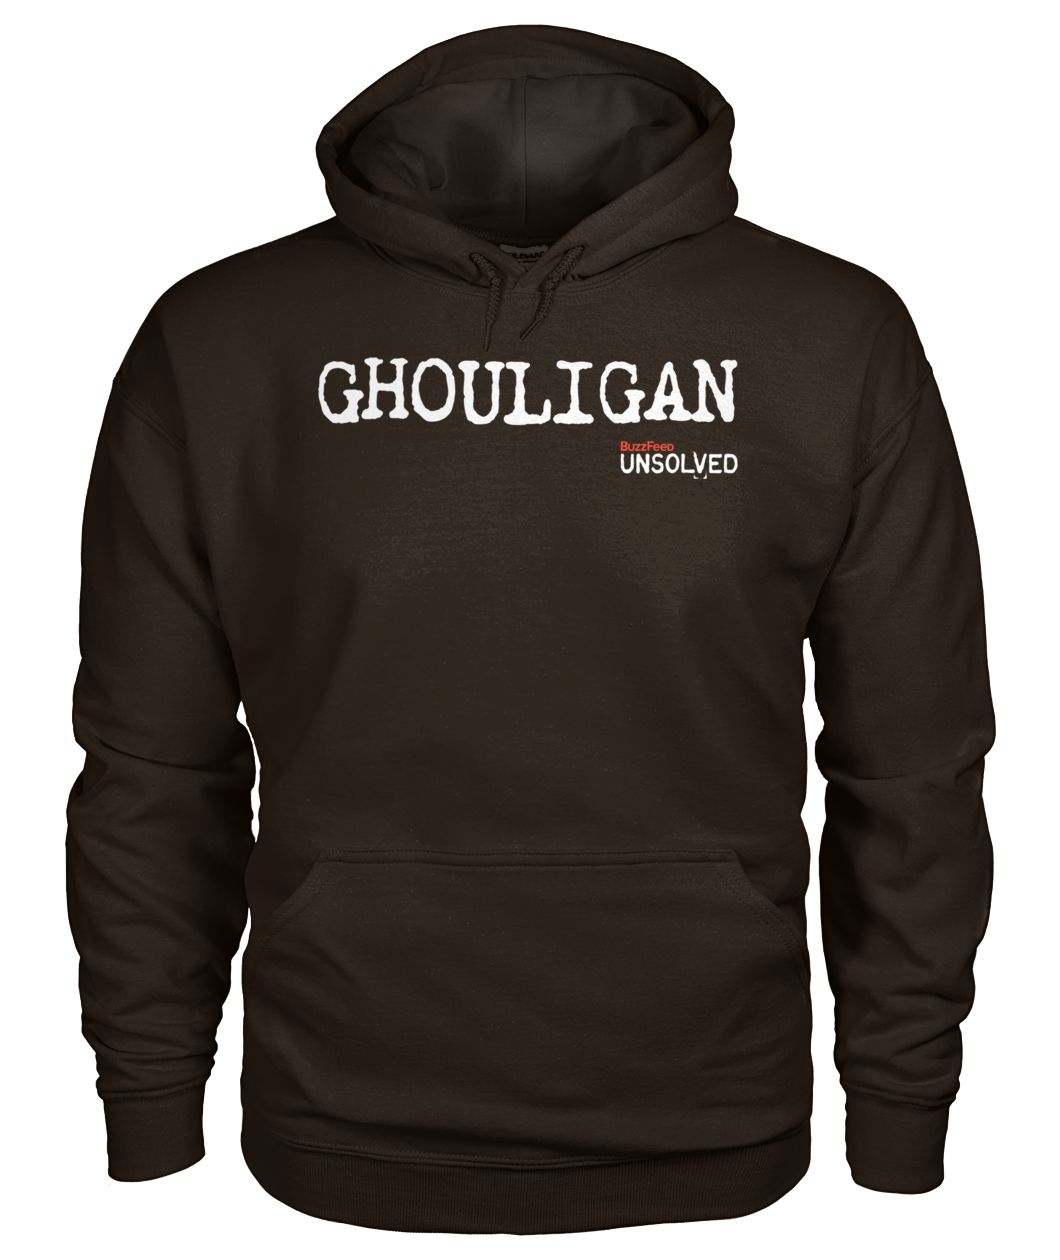 Buzzfeed unsolved ghouligan gildan hoodie